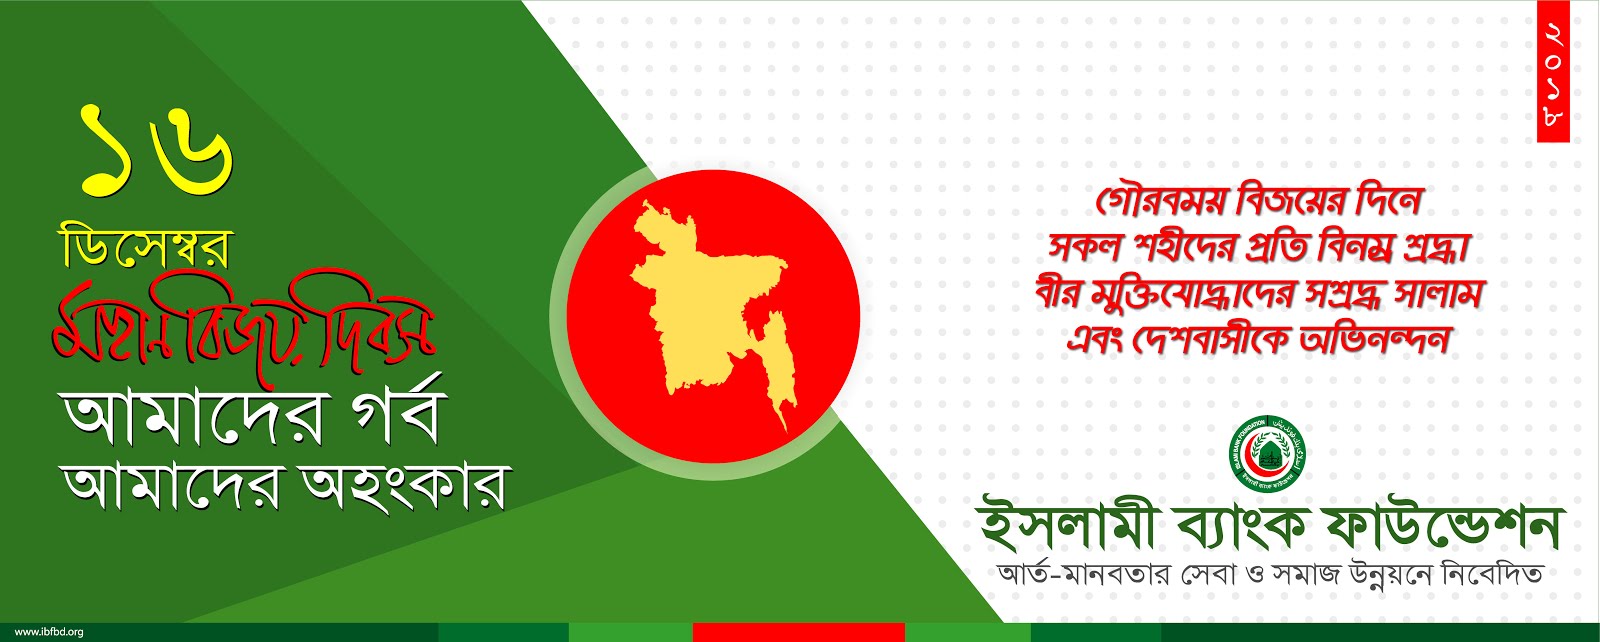 Victory Day Banner Background - Victory Day Wishes Banner Image - bijoy dibos shuvecca pic - NeotericIT.com